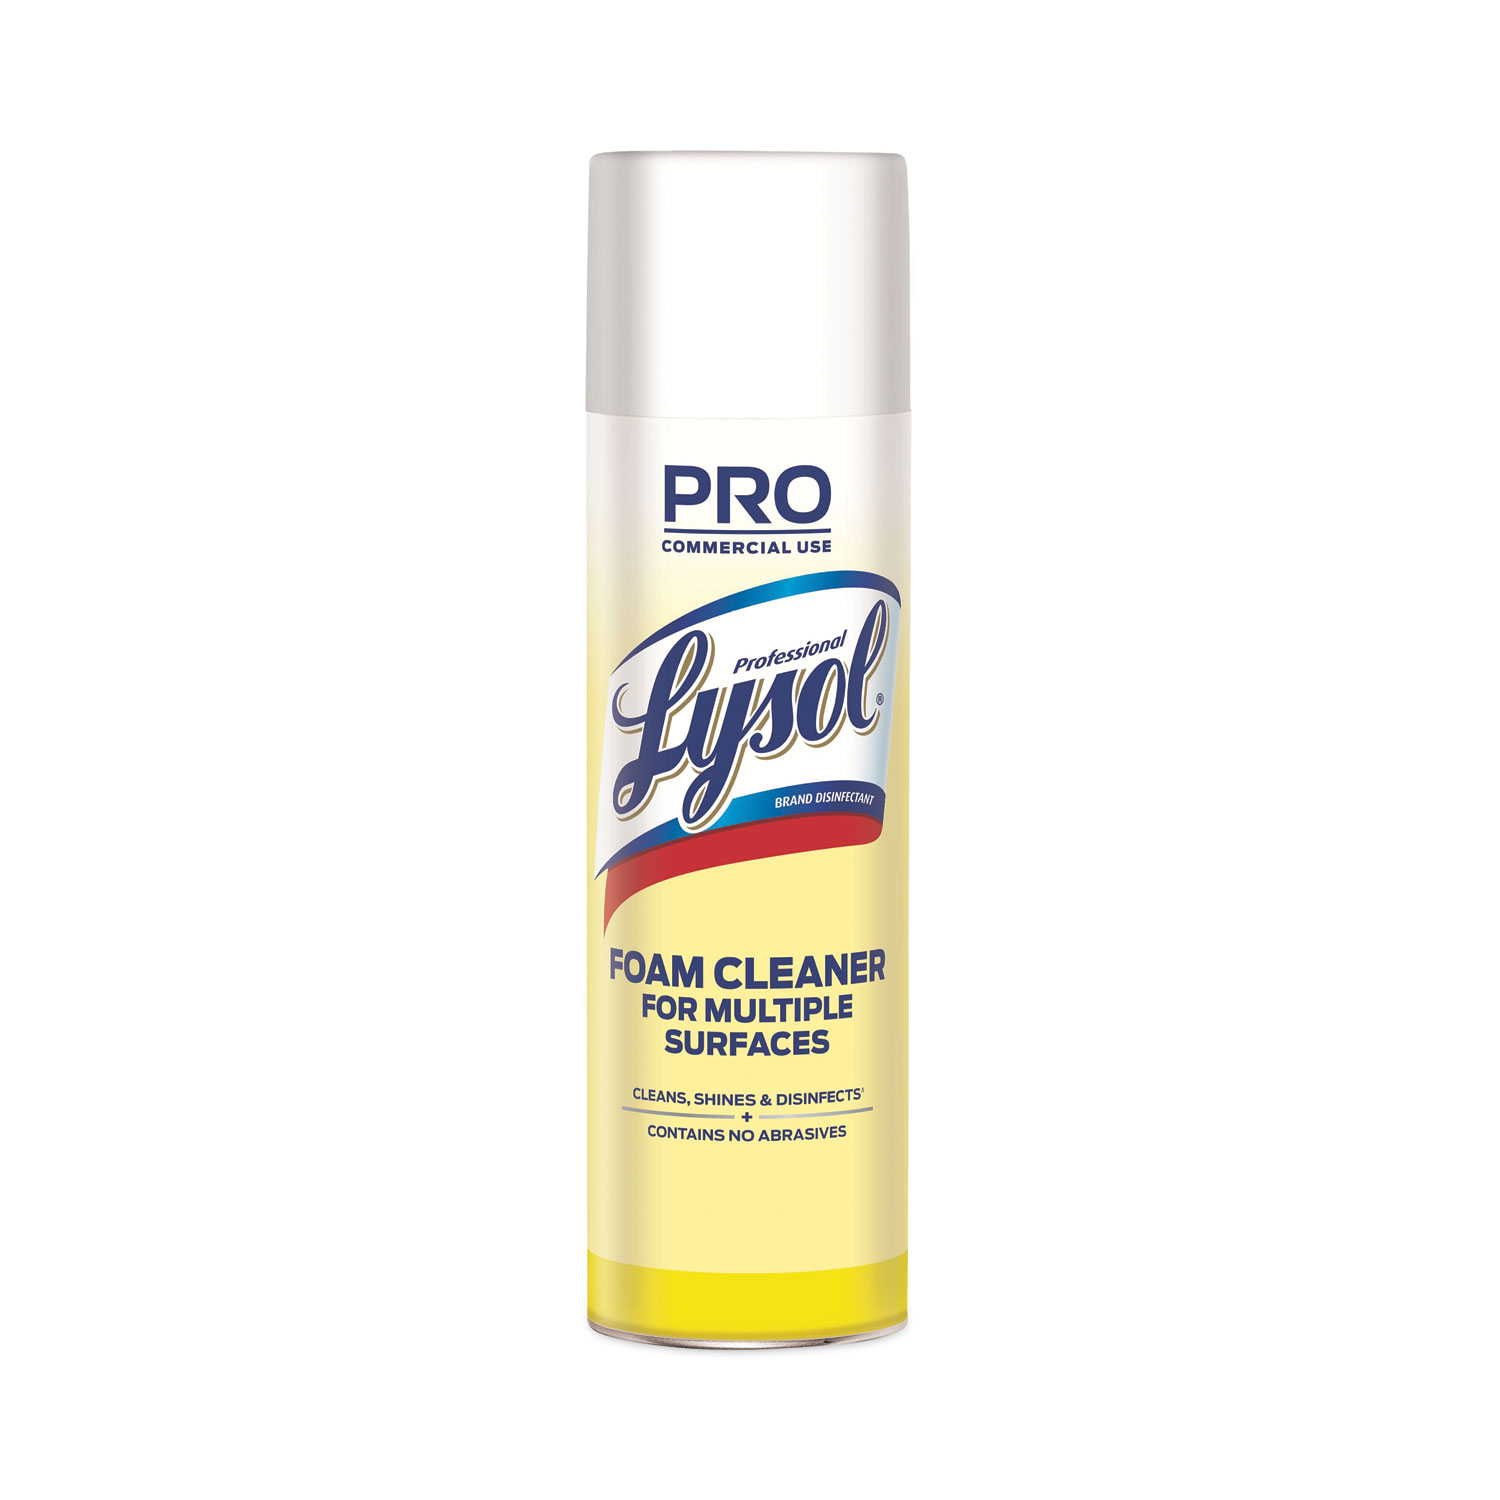 Lysol US (@lysol) • Instagram photos and videos